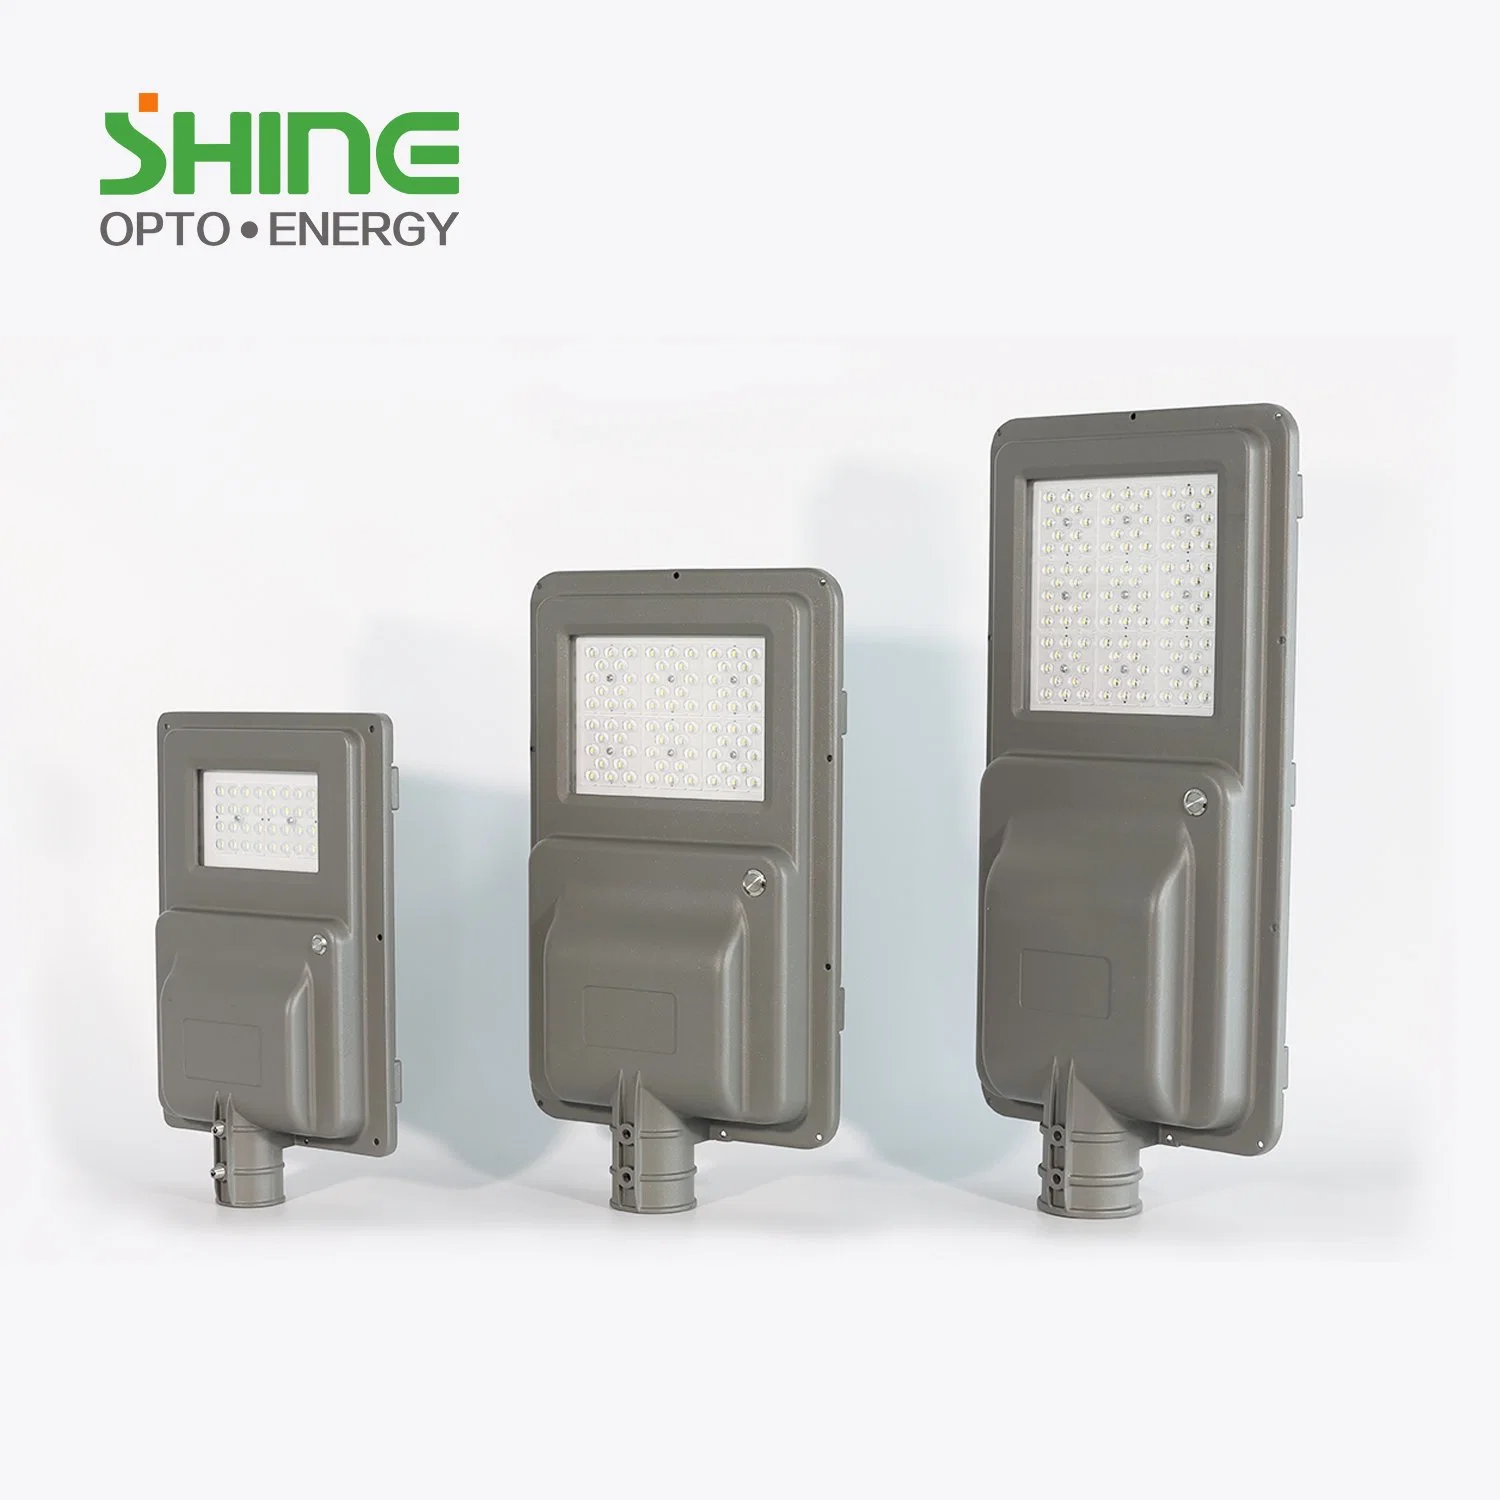 All in One Solar LED Street Light Promotional LED Yard Light Direct Sales Body Induction Integrated